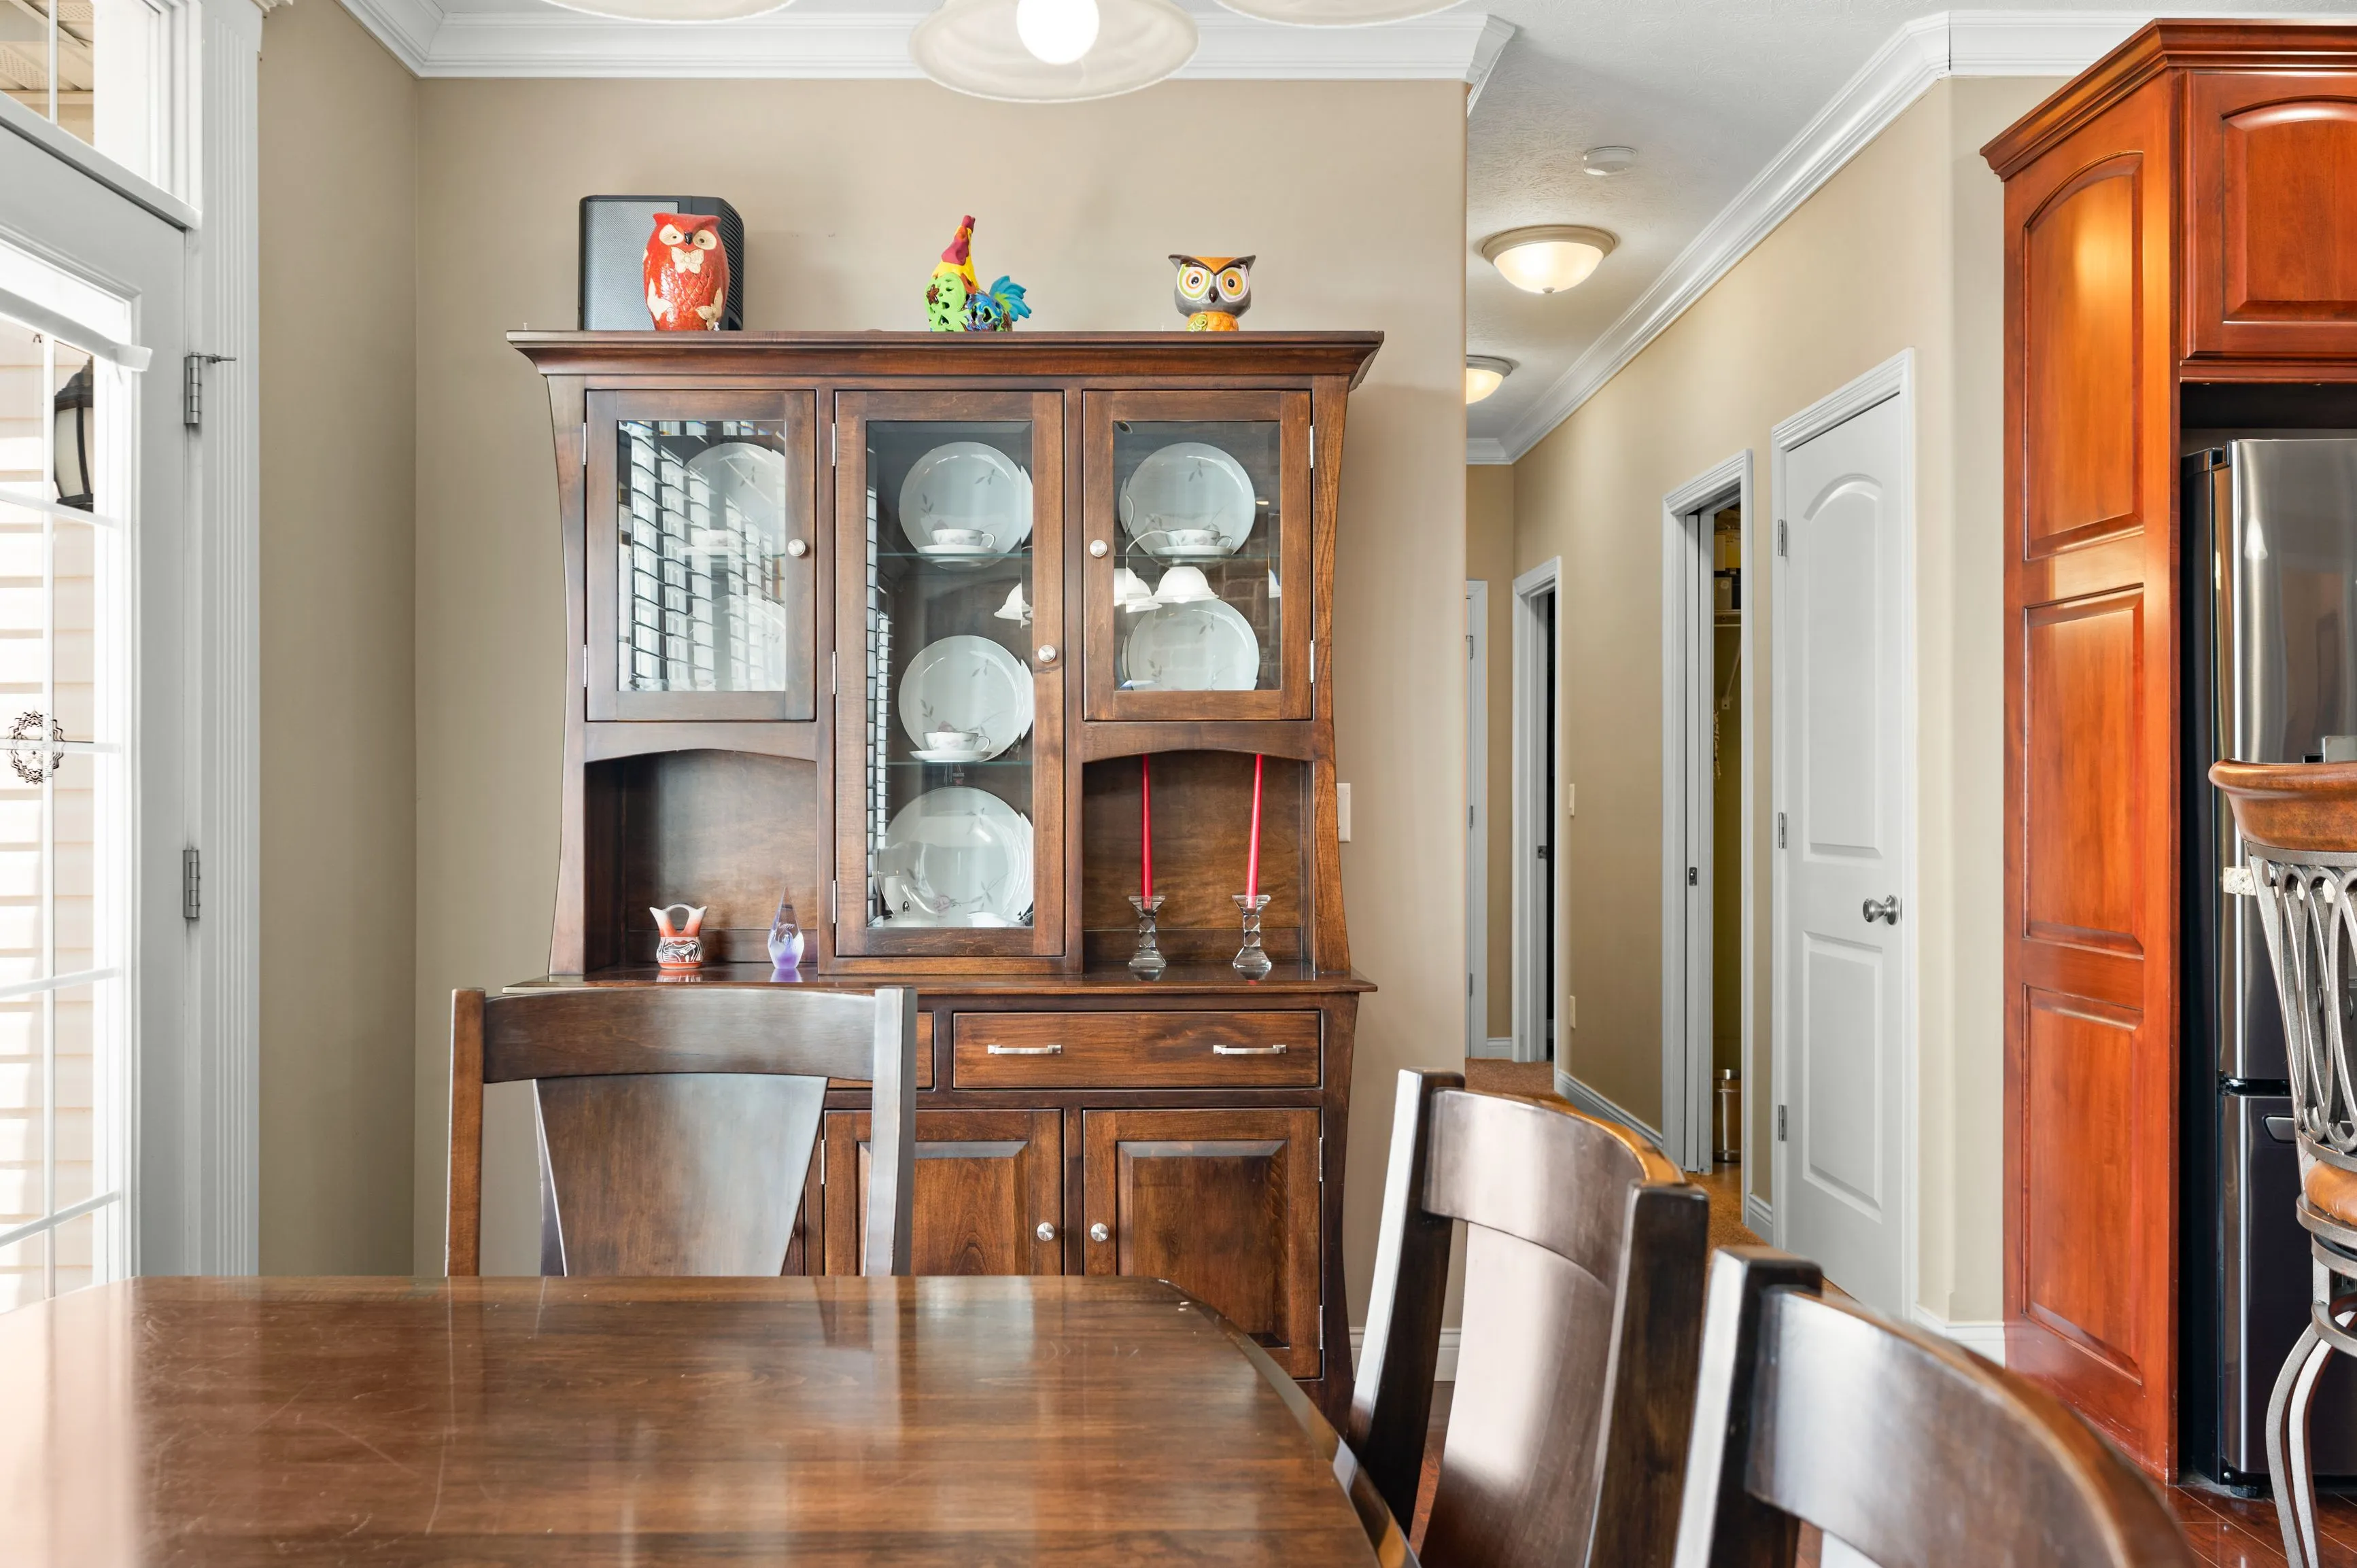 Cozy dining room with a wooden table, chairs, and a china cabinet displaying dishes and decorative items.